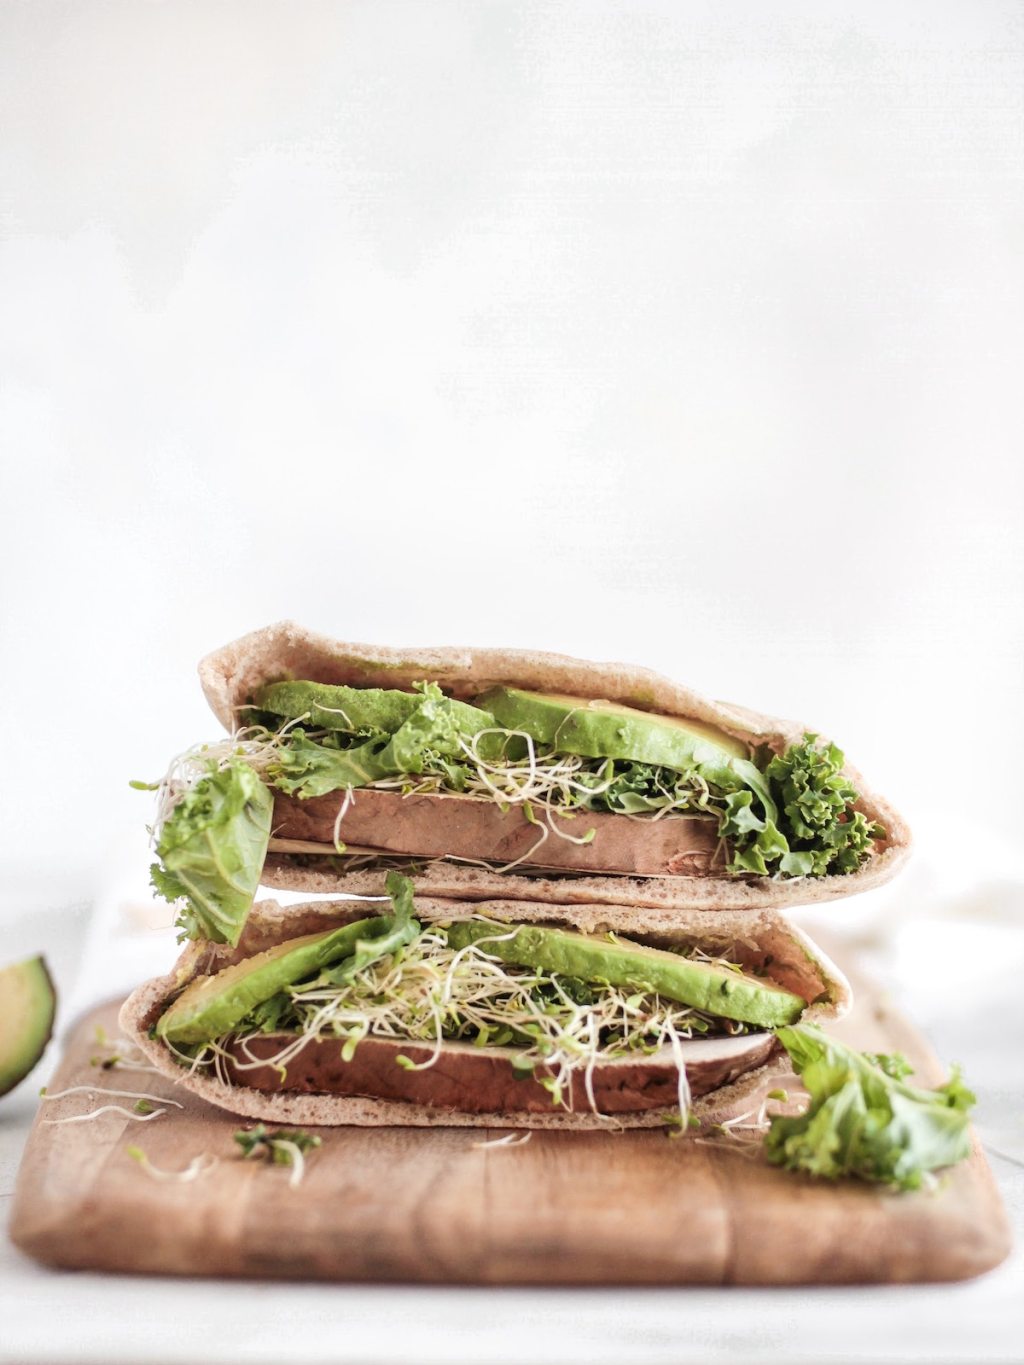 Green Lunch Sandwiches with Avo and Sprouts